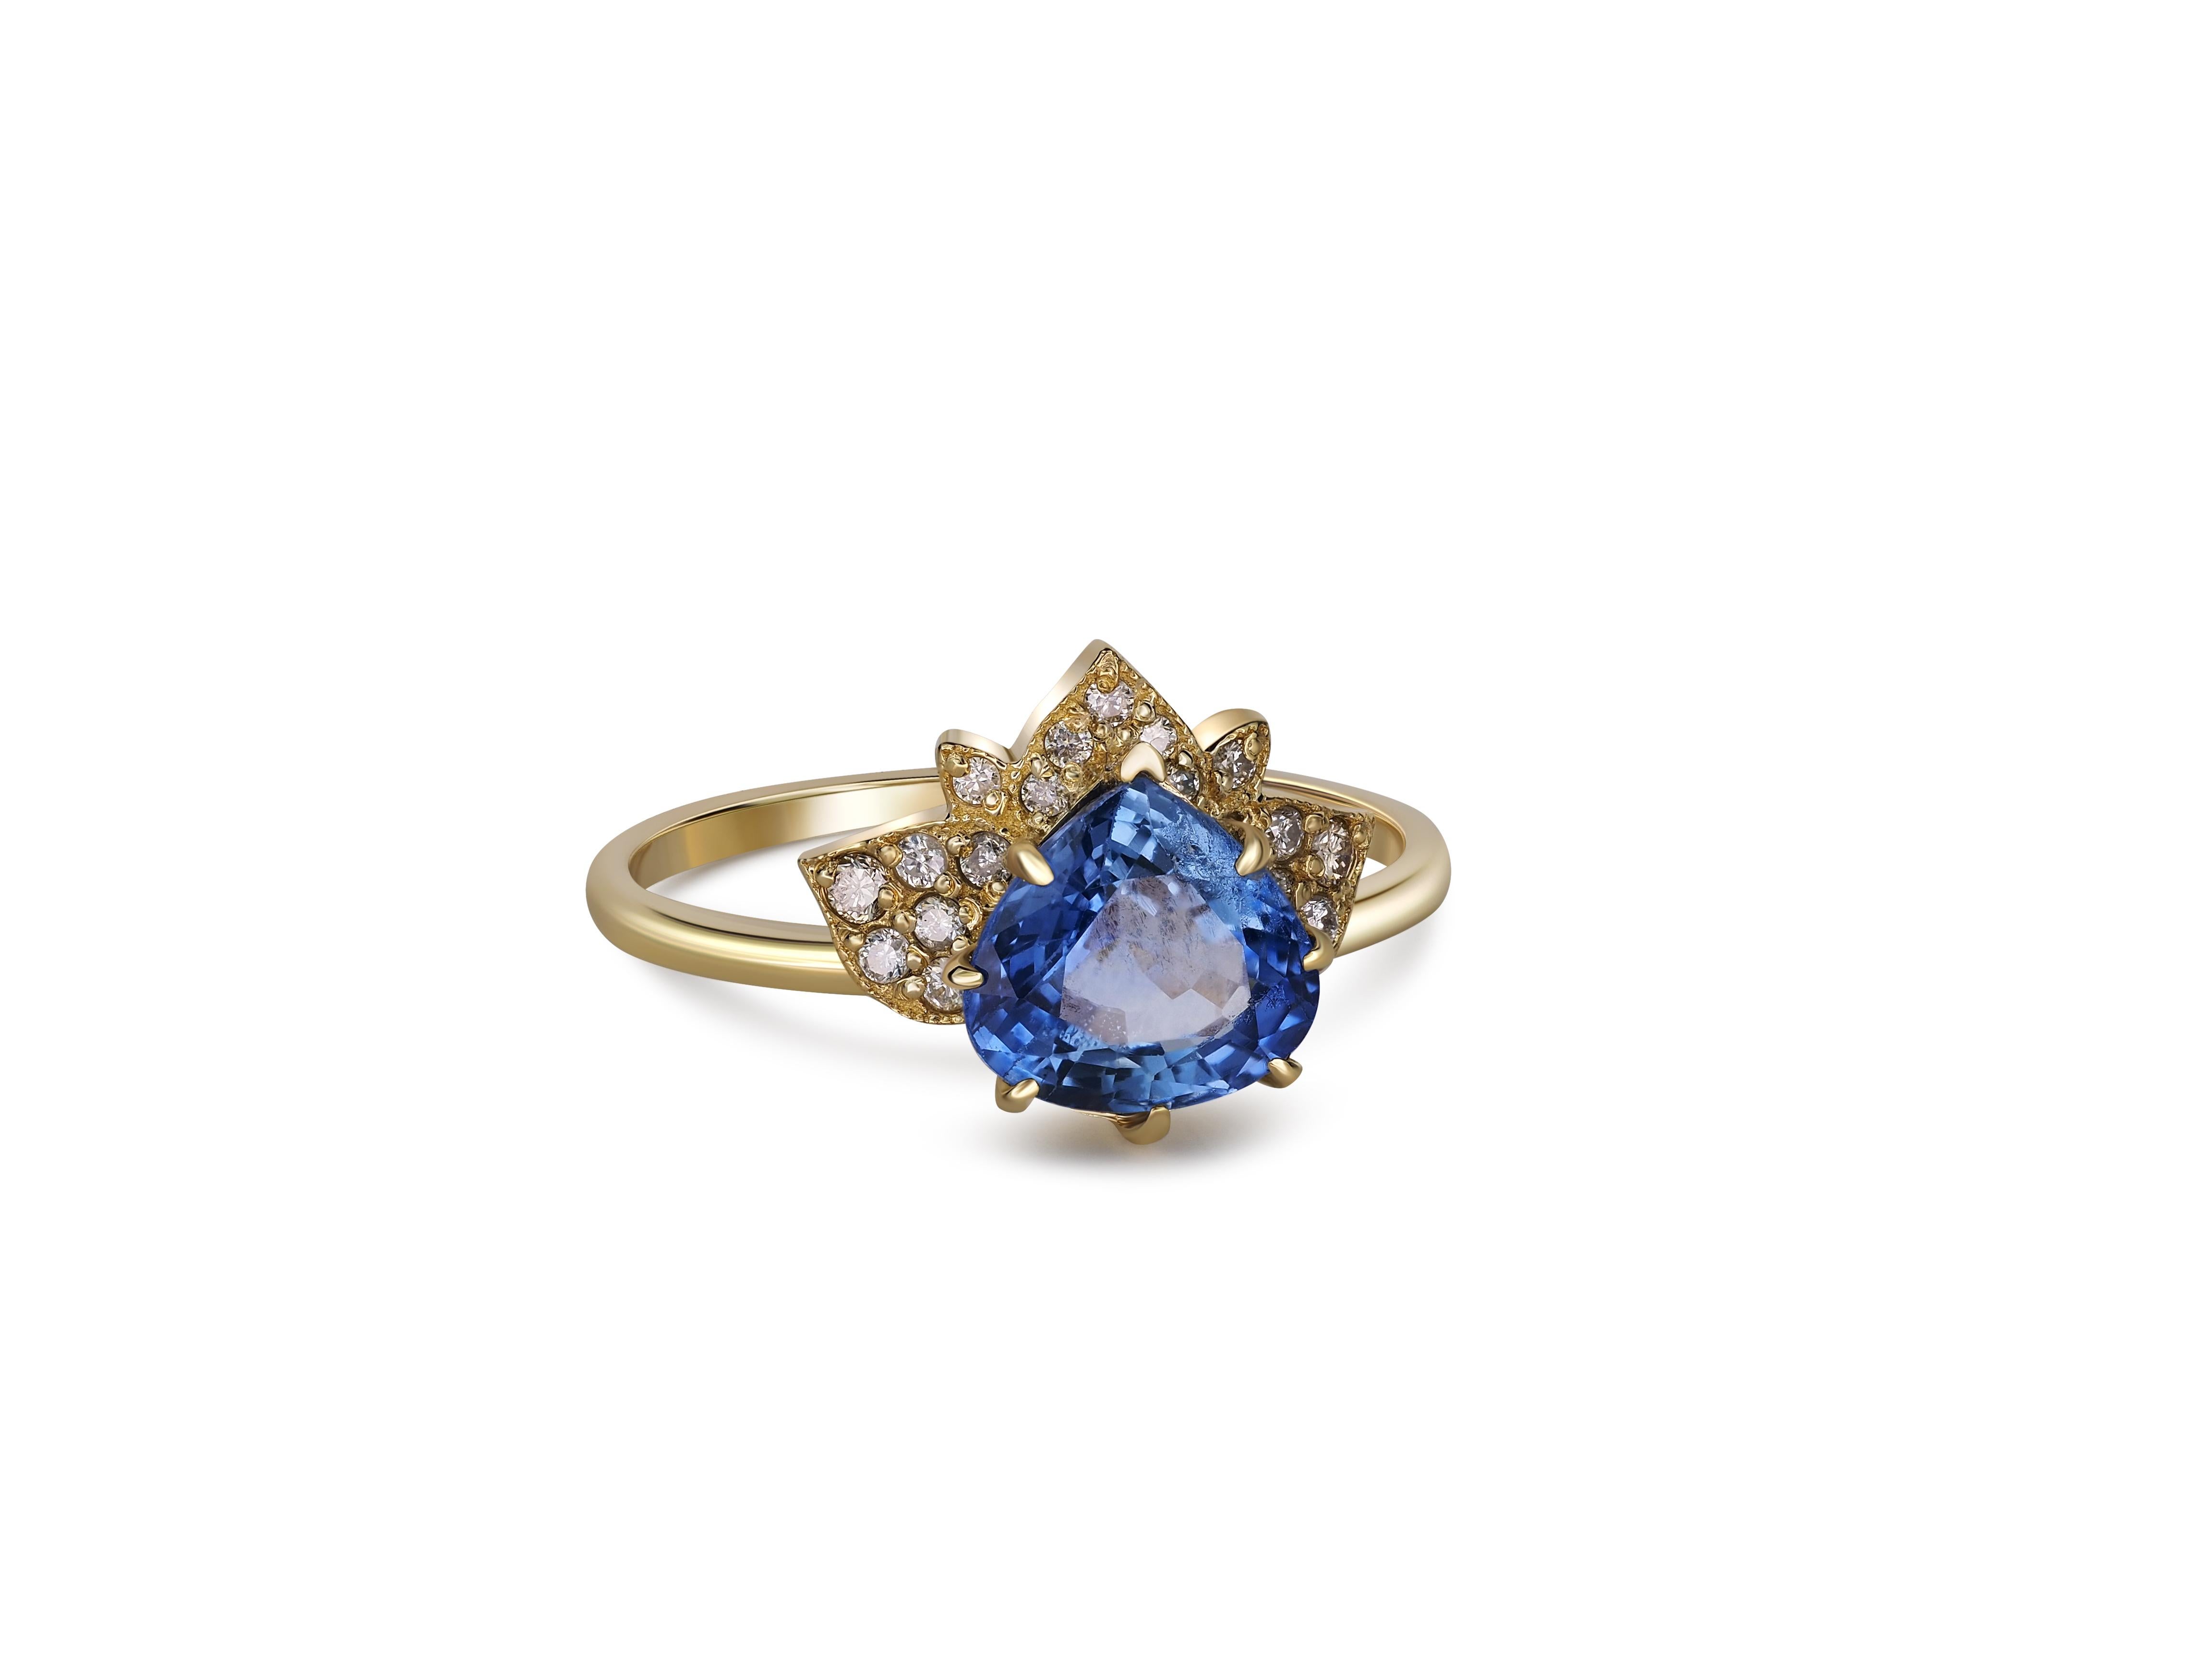 Pear Cut Pear Sapphire Ring, Lotus Ring with Sapphire, Certified Shri Lanka Sapphire Ring